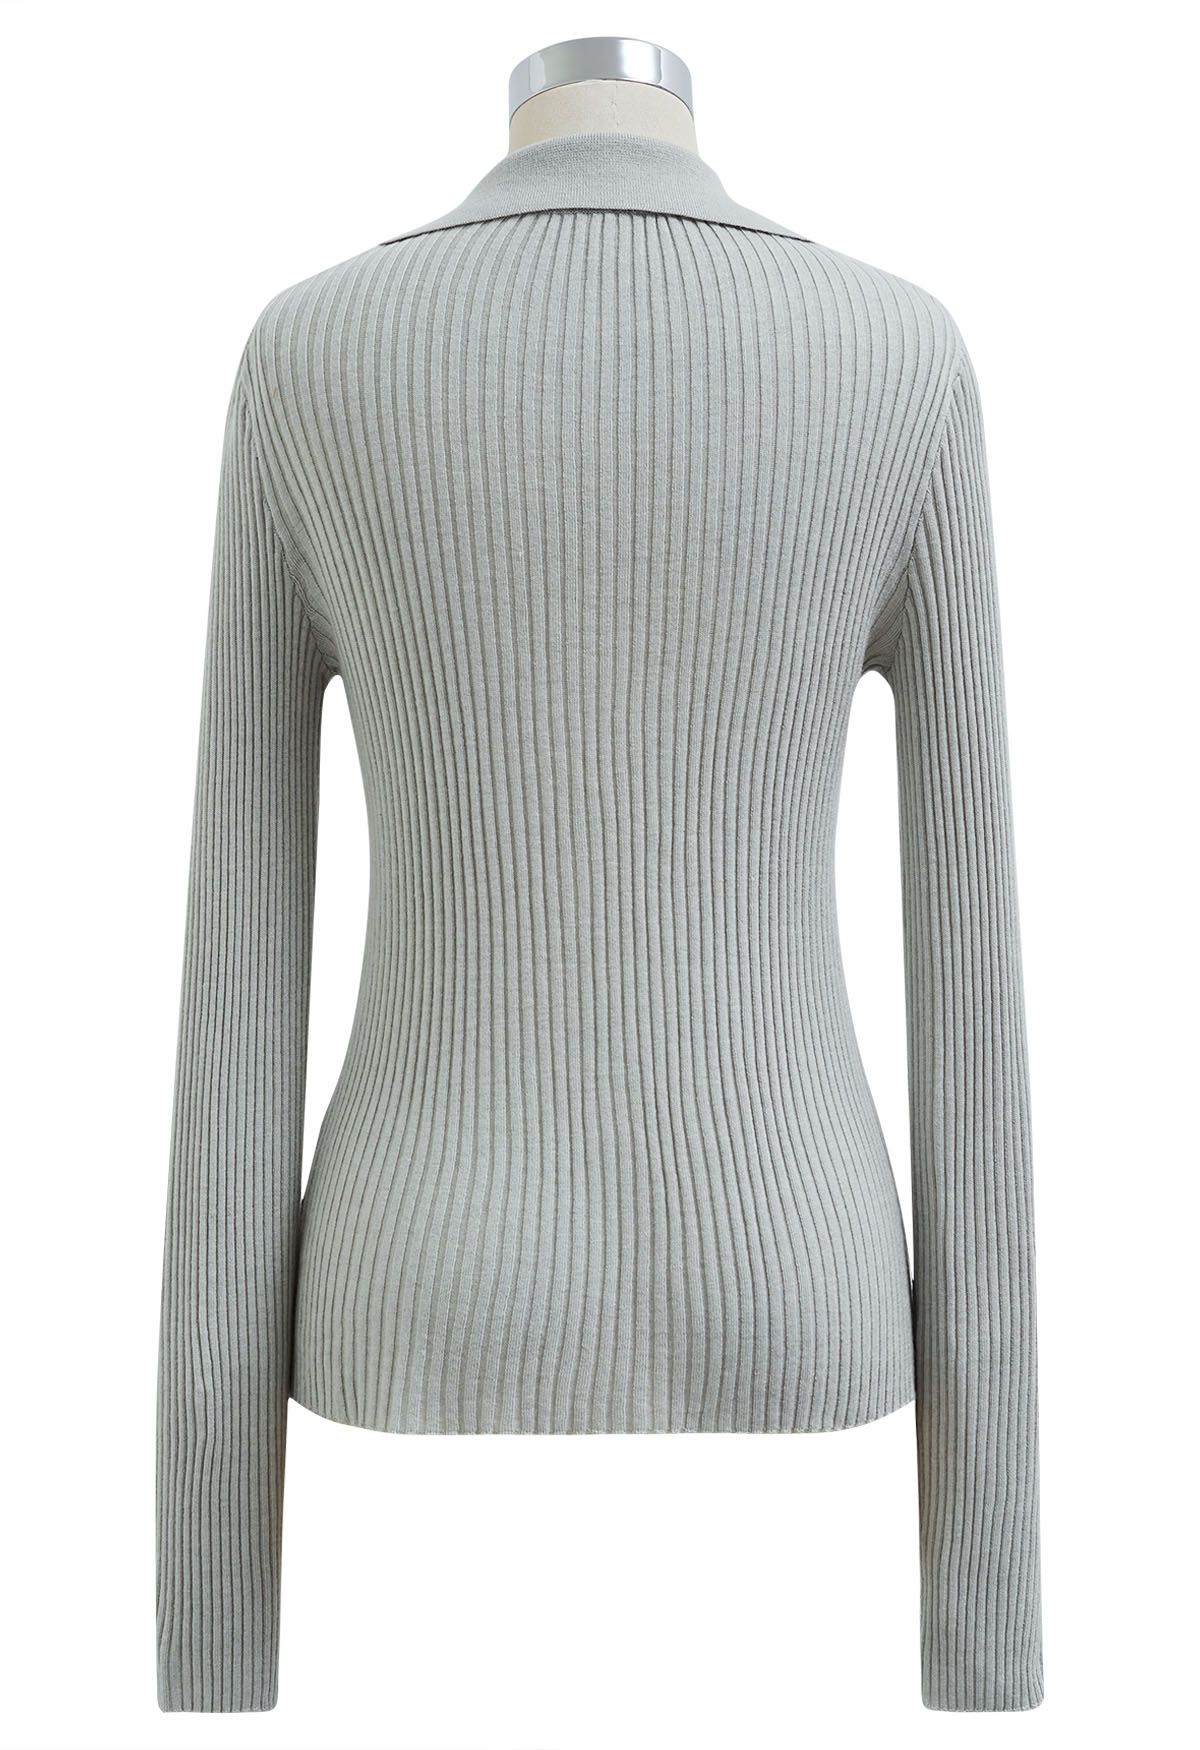 V-Neck Collared Fitted Knit Top in Mint